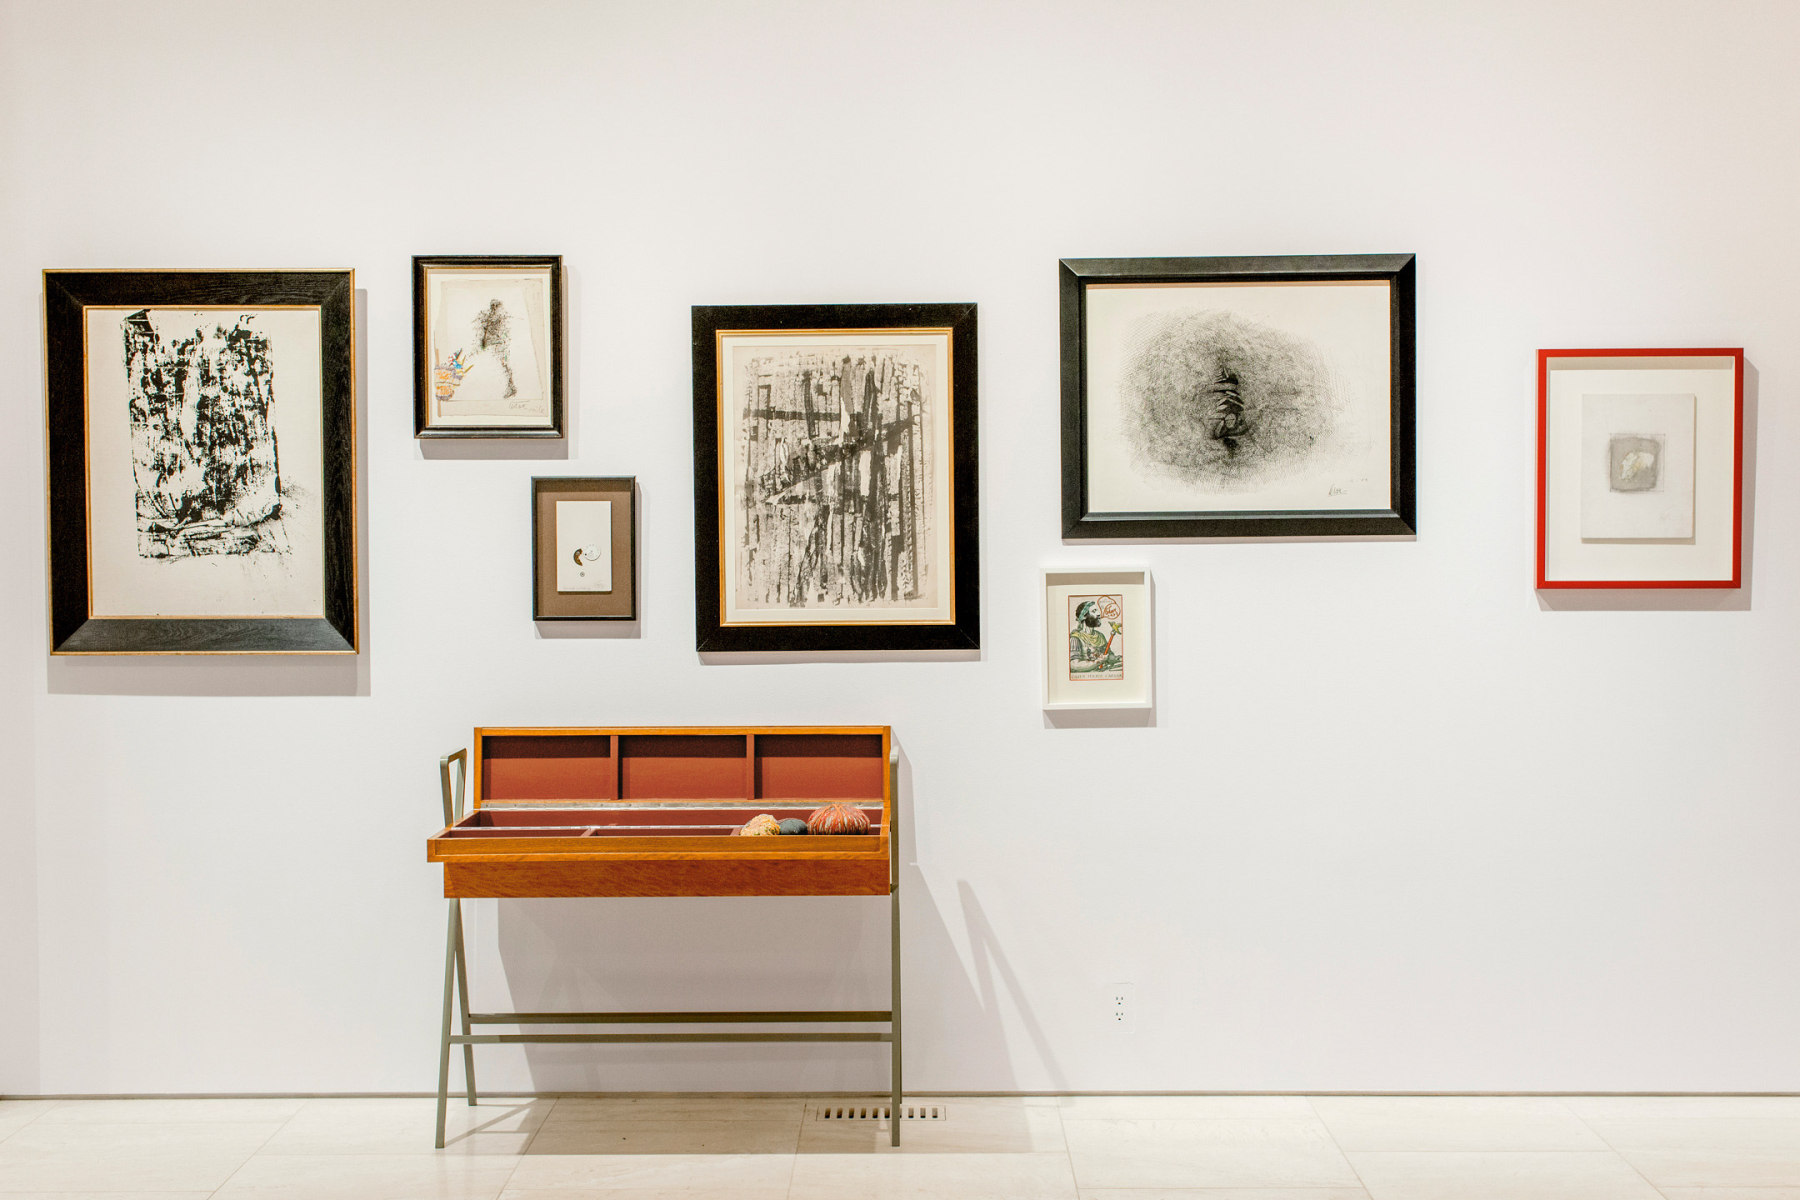 Installation view of&nbsp;The Voice of Things, January 24 &ndash; February 23, 2019